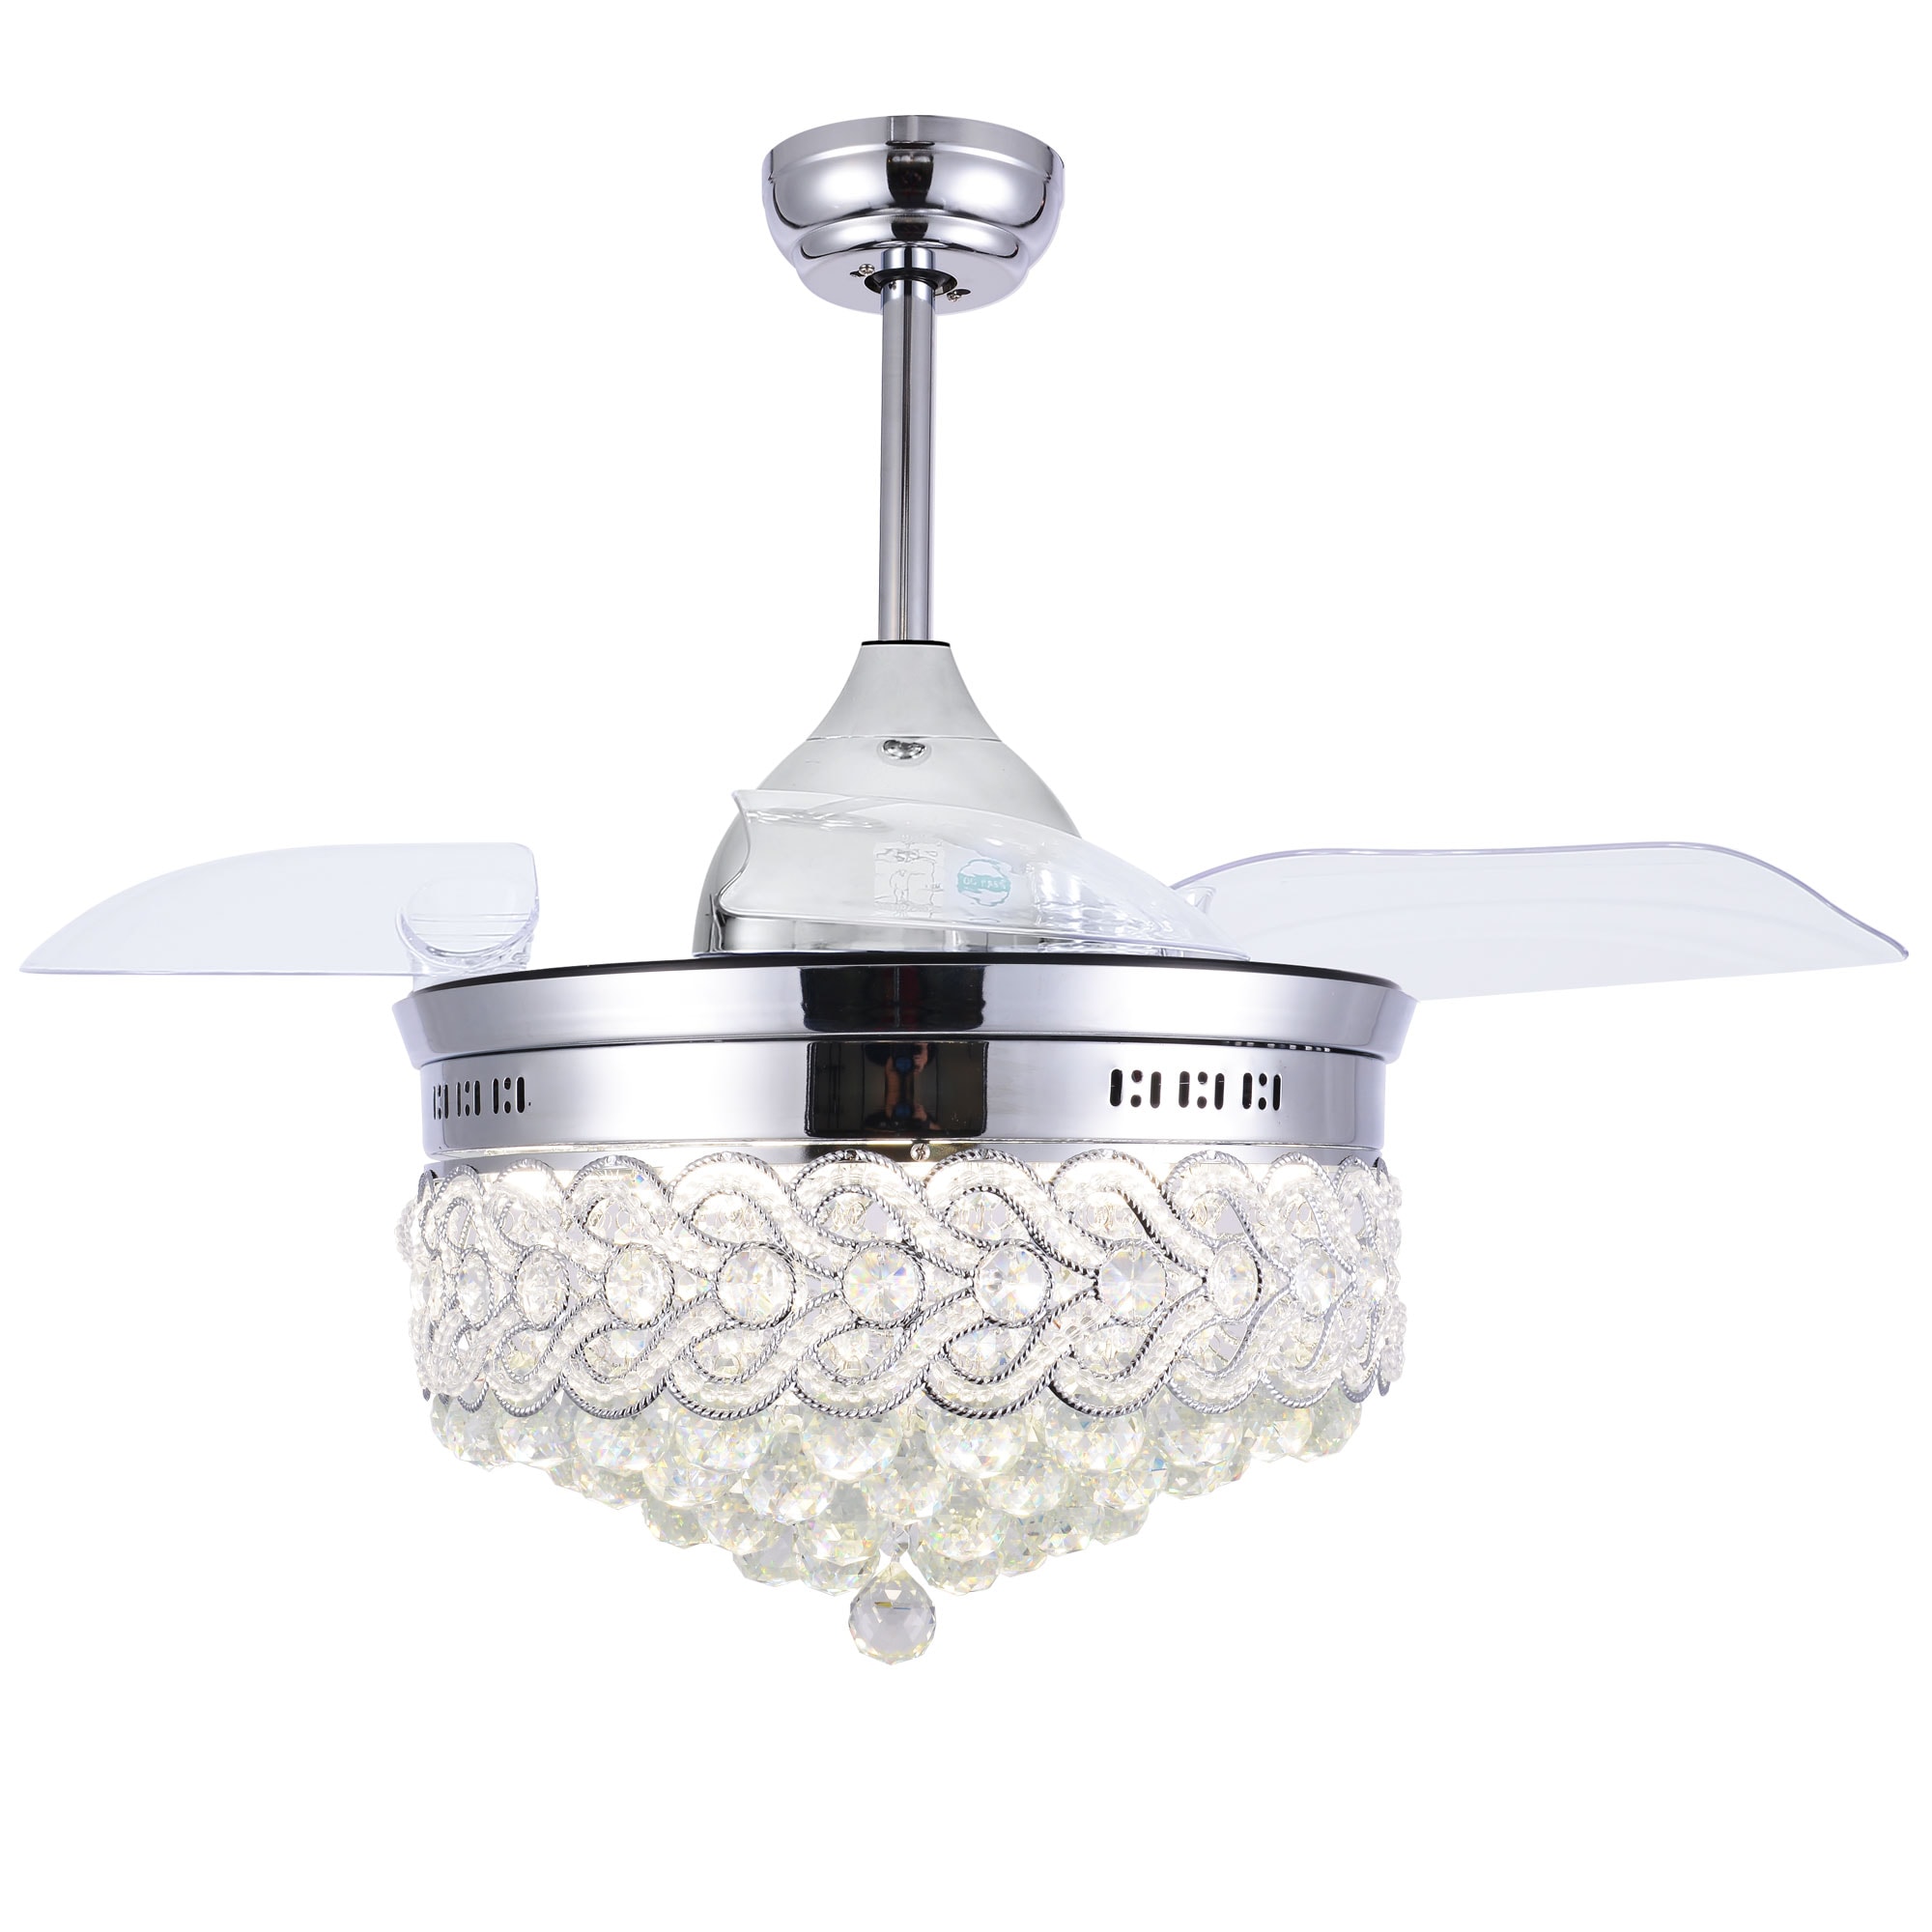 Dimmable Modern LED Chandeliers Crystal Retractable Ceiling Fans Light w/Remote 